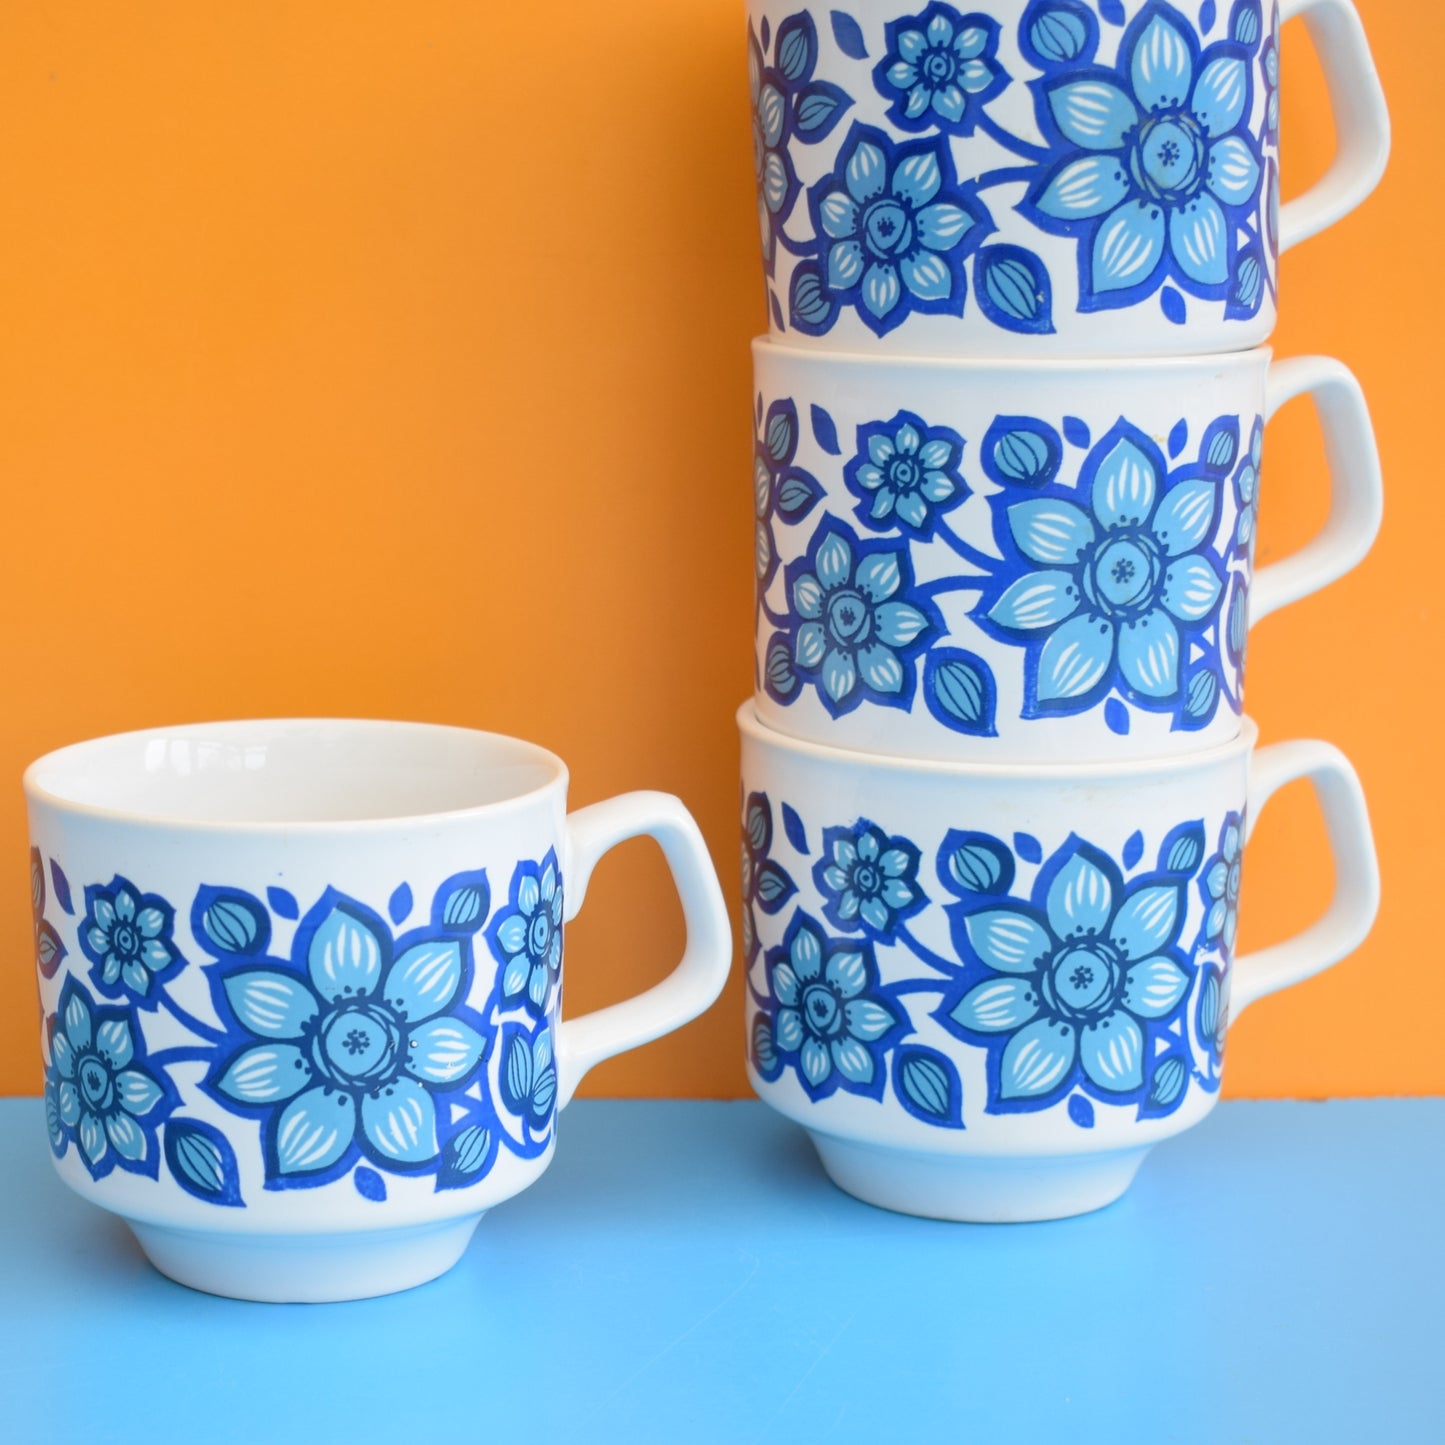 Vintage 1960s Tams Cups - Blue Flowers